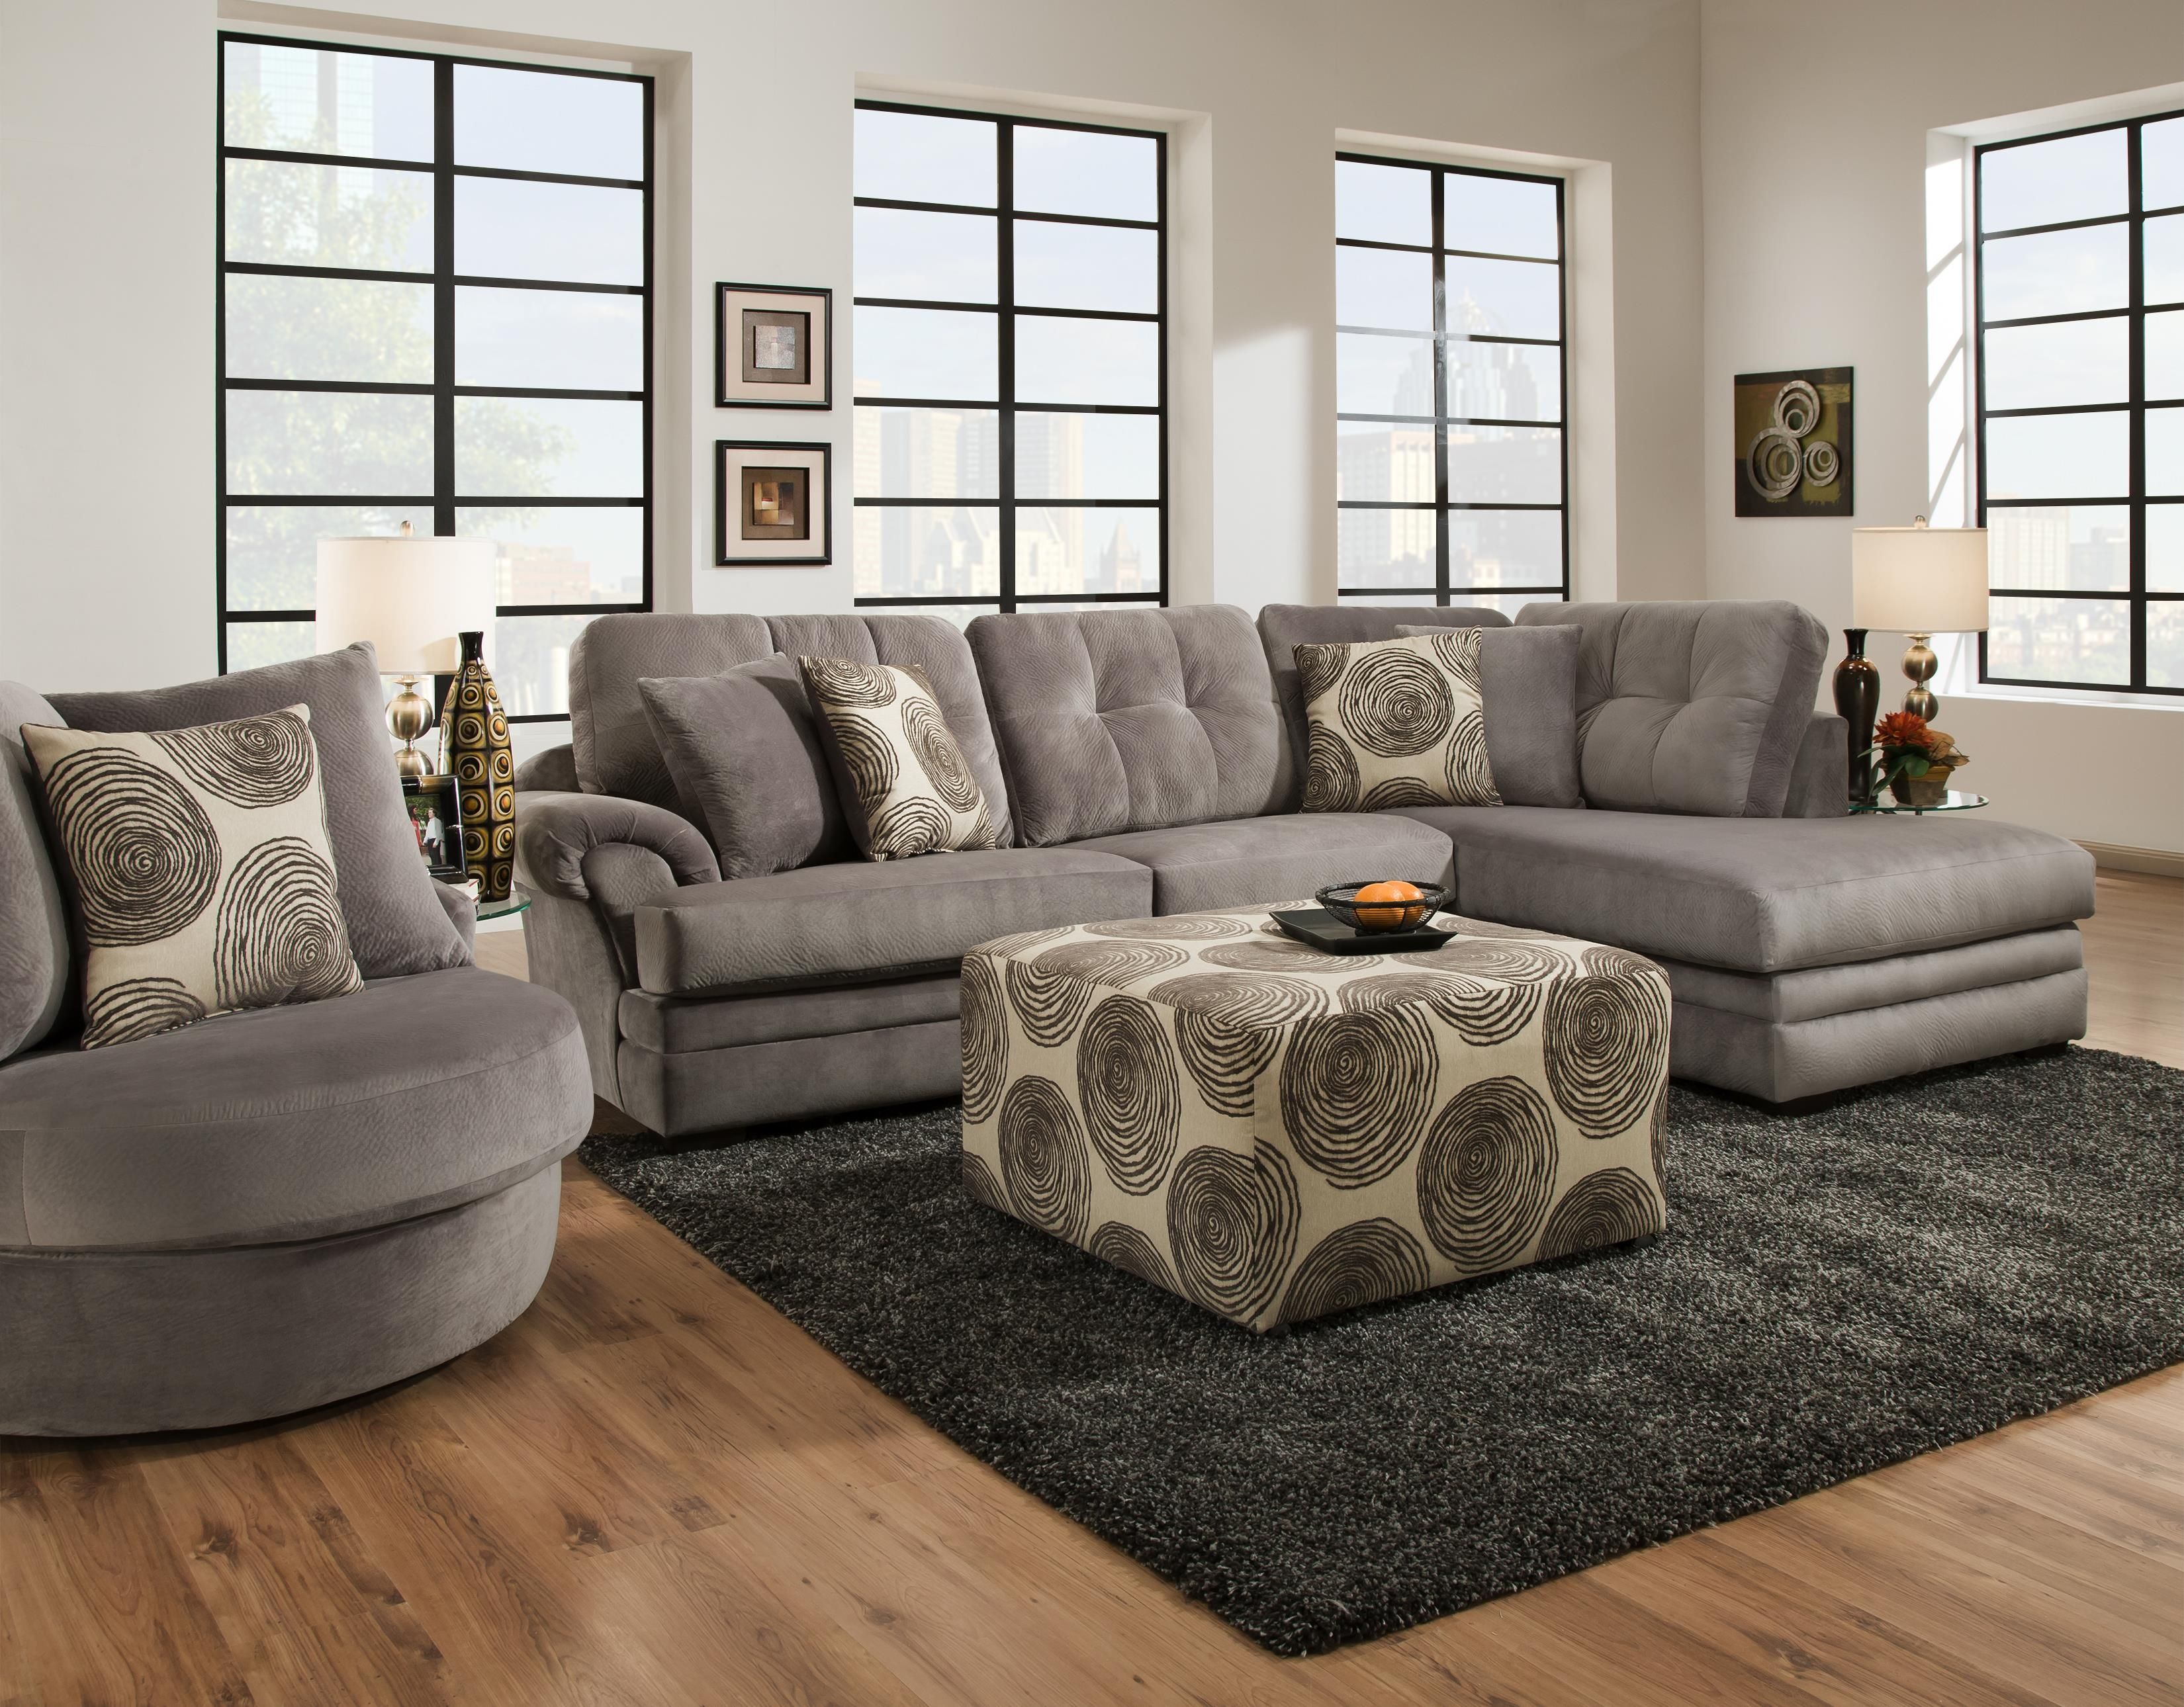 Living Room With Sectional And Chair